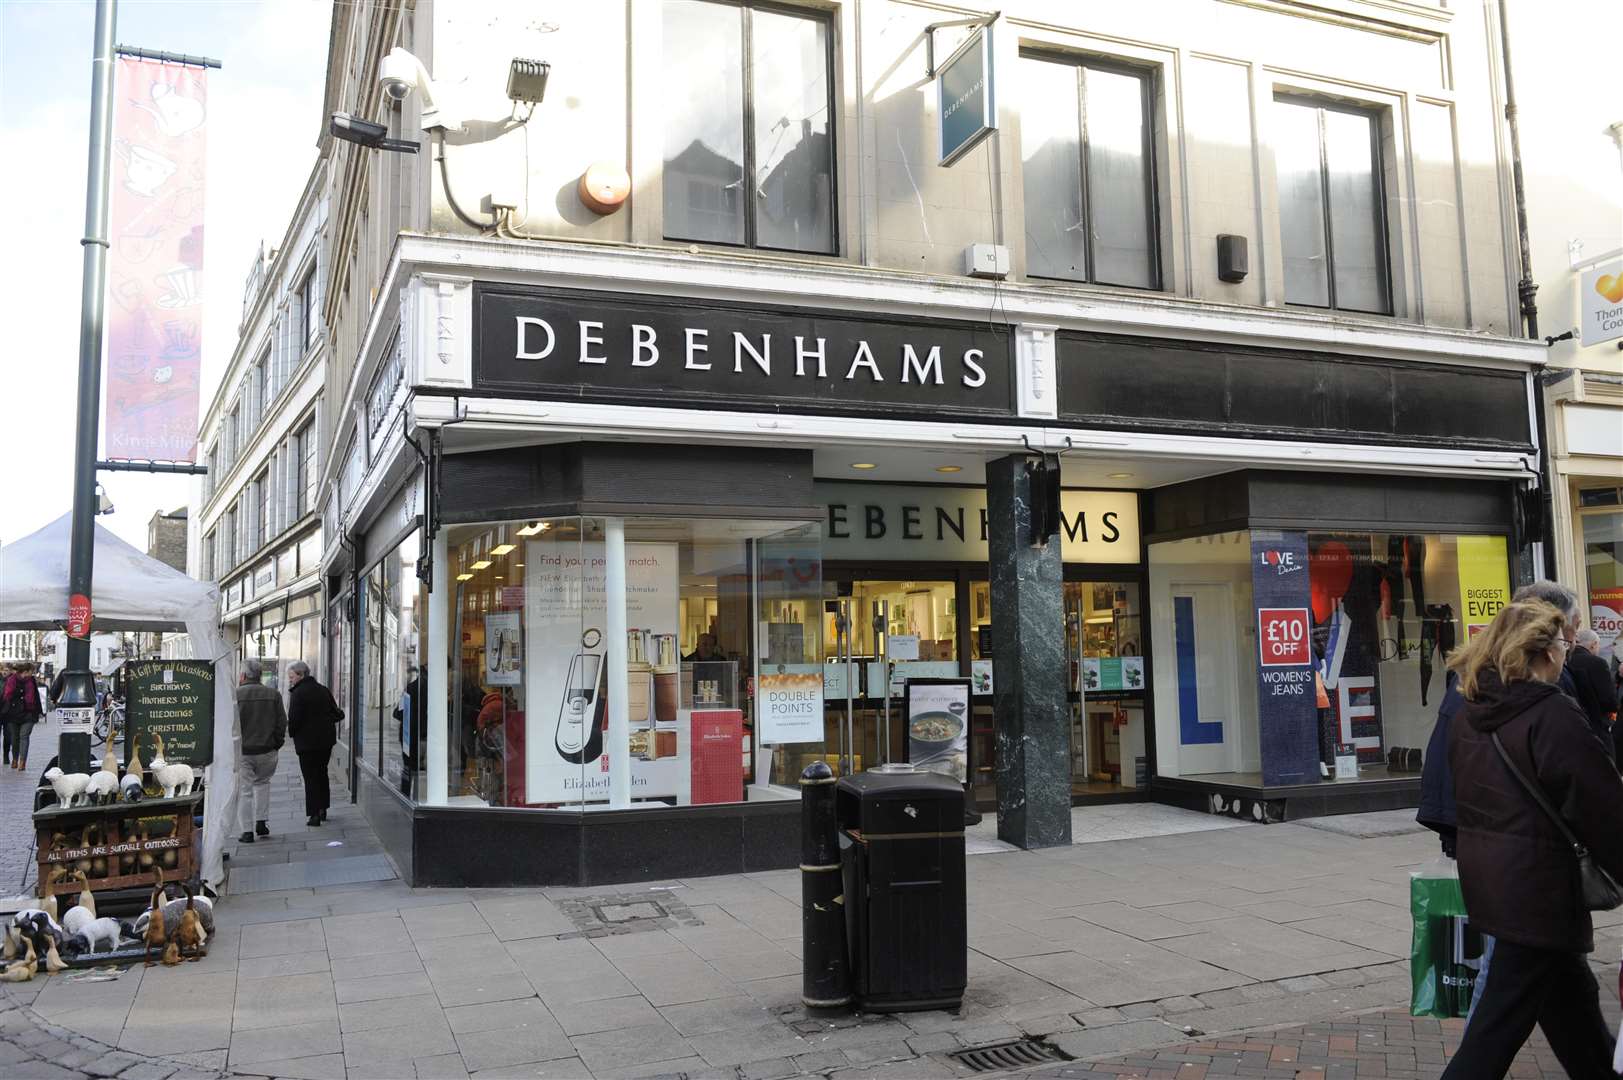 Debenhams in Canterbury is one of those stores facing an uncertain future